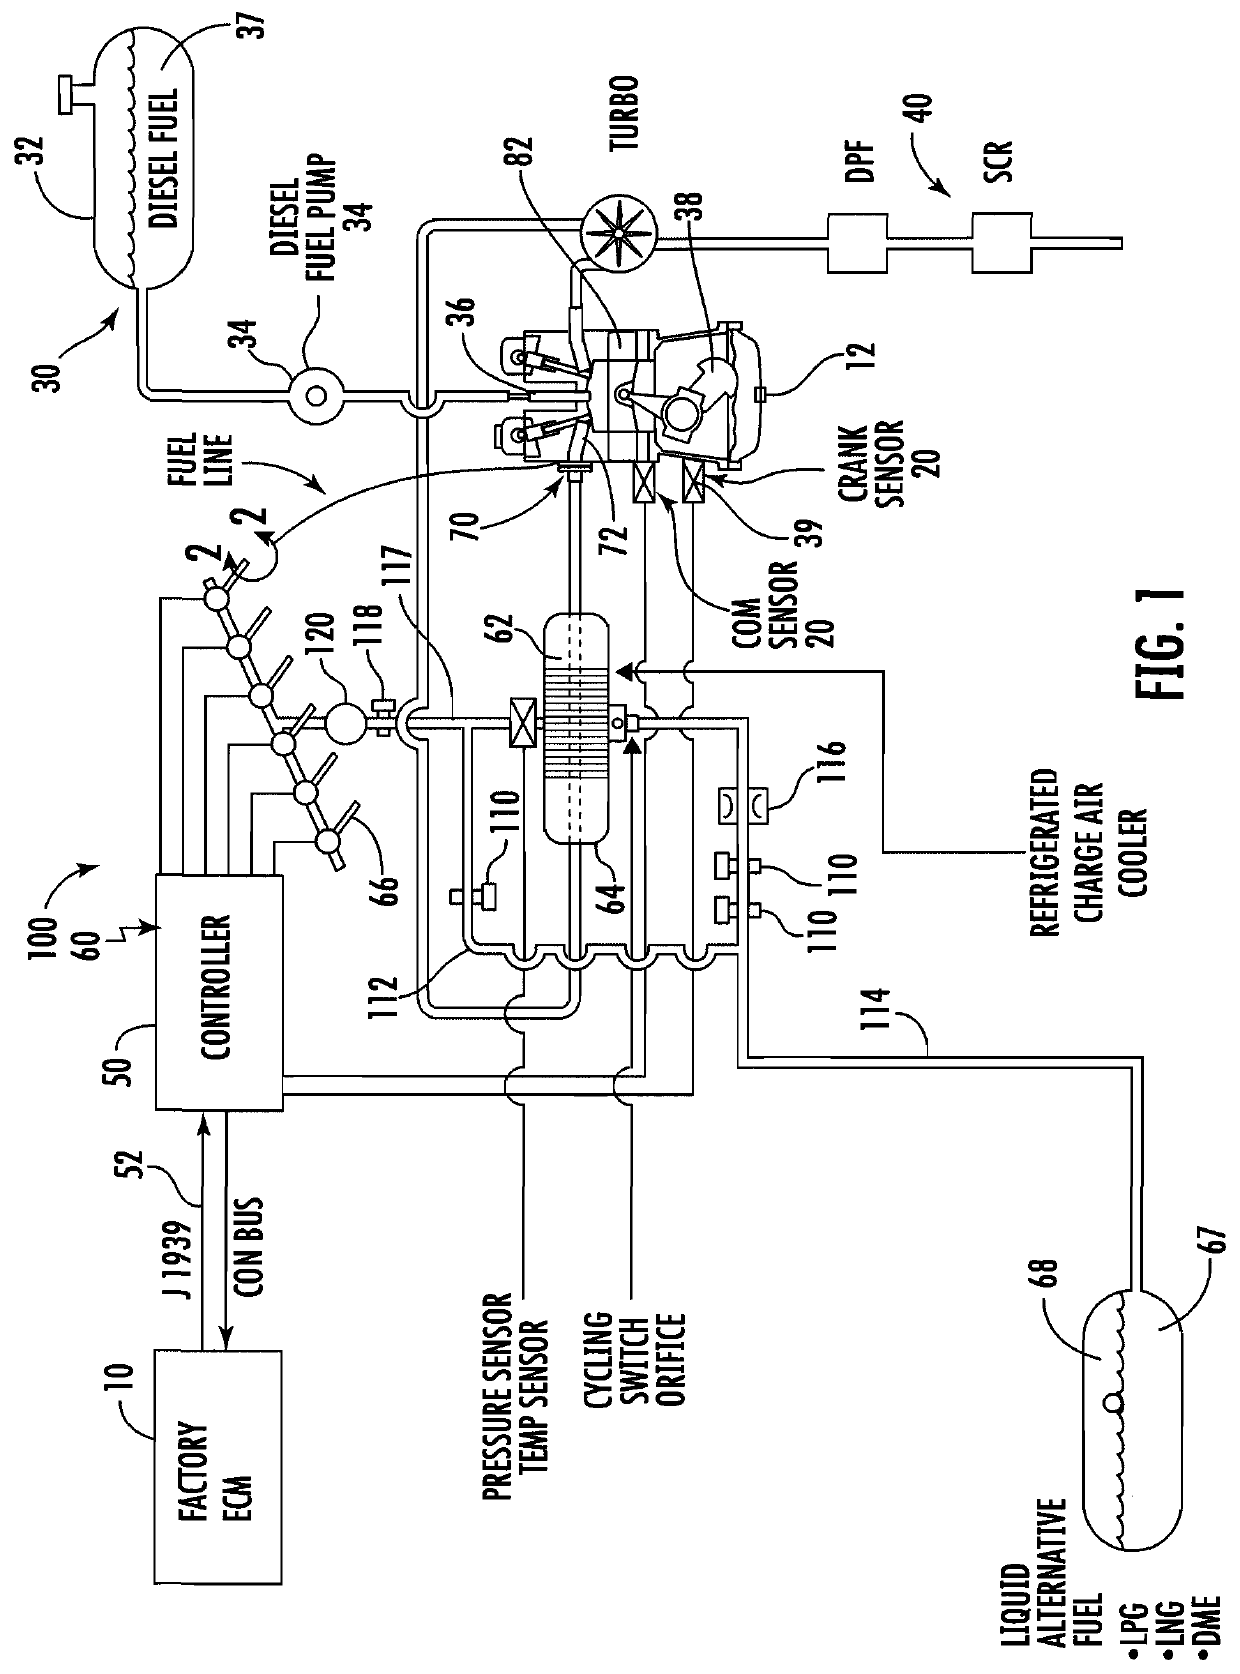 Dual fuel injection system for optimizing fuel usage and minimizing slip for diesel engines